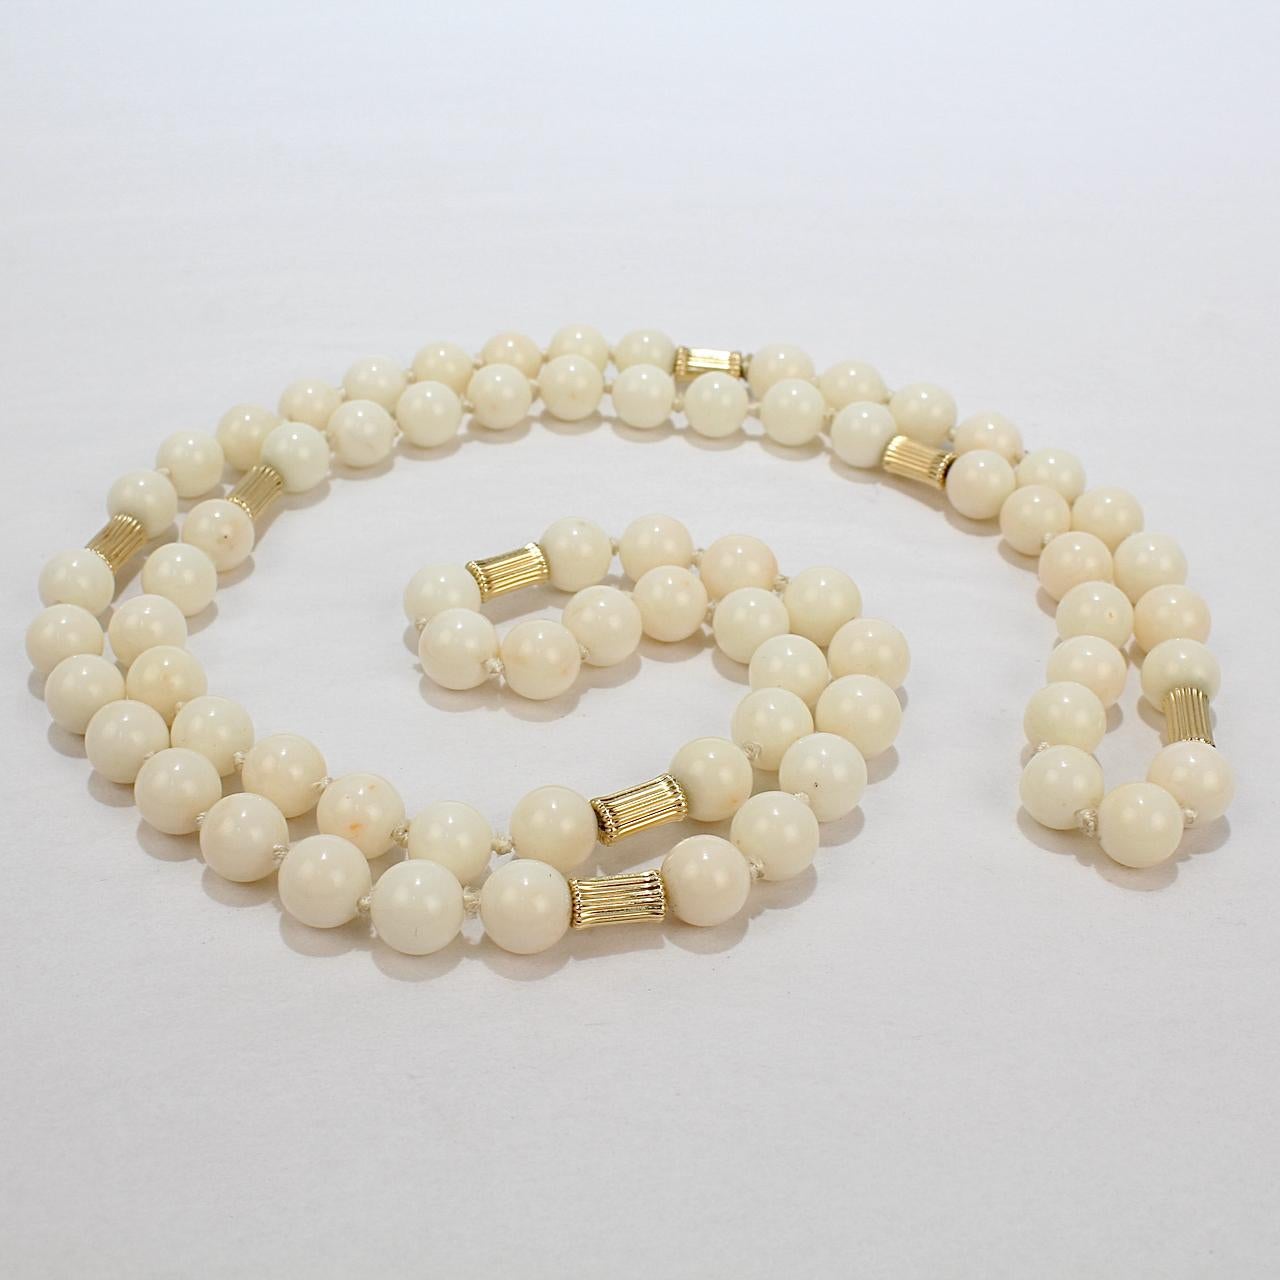 A fine vintage beaded necklace.

Comprised of 9 mm near-white coral beads that are offset with reeded gold beads.

Simply a classically beautiful necklace!

Date:
20th Century

Overall Condition:
It is in overall very good, as-pictured, used estate